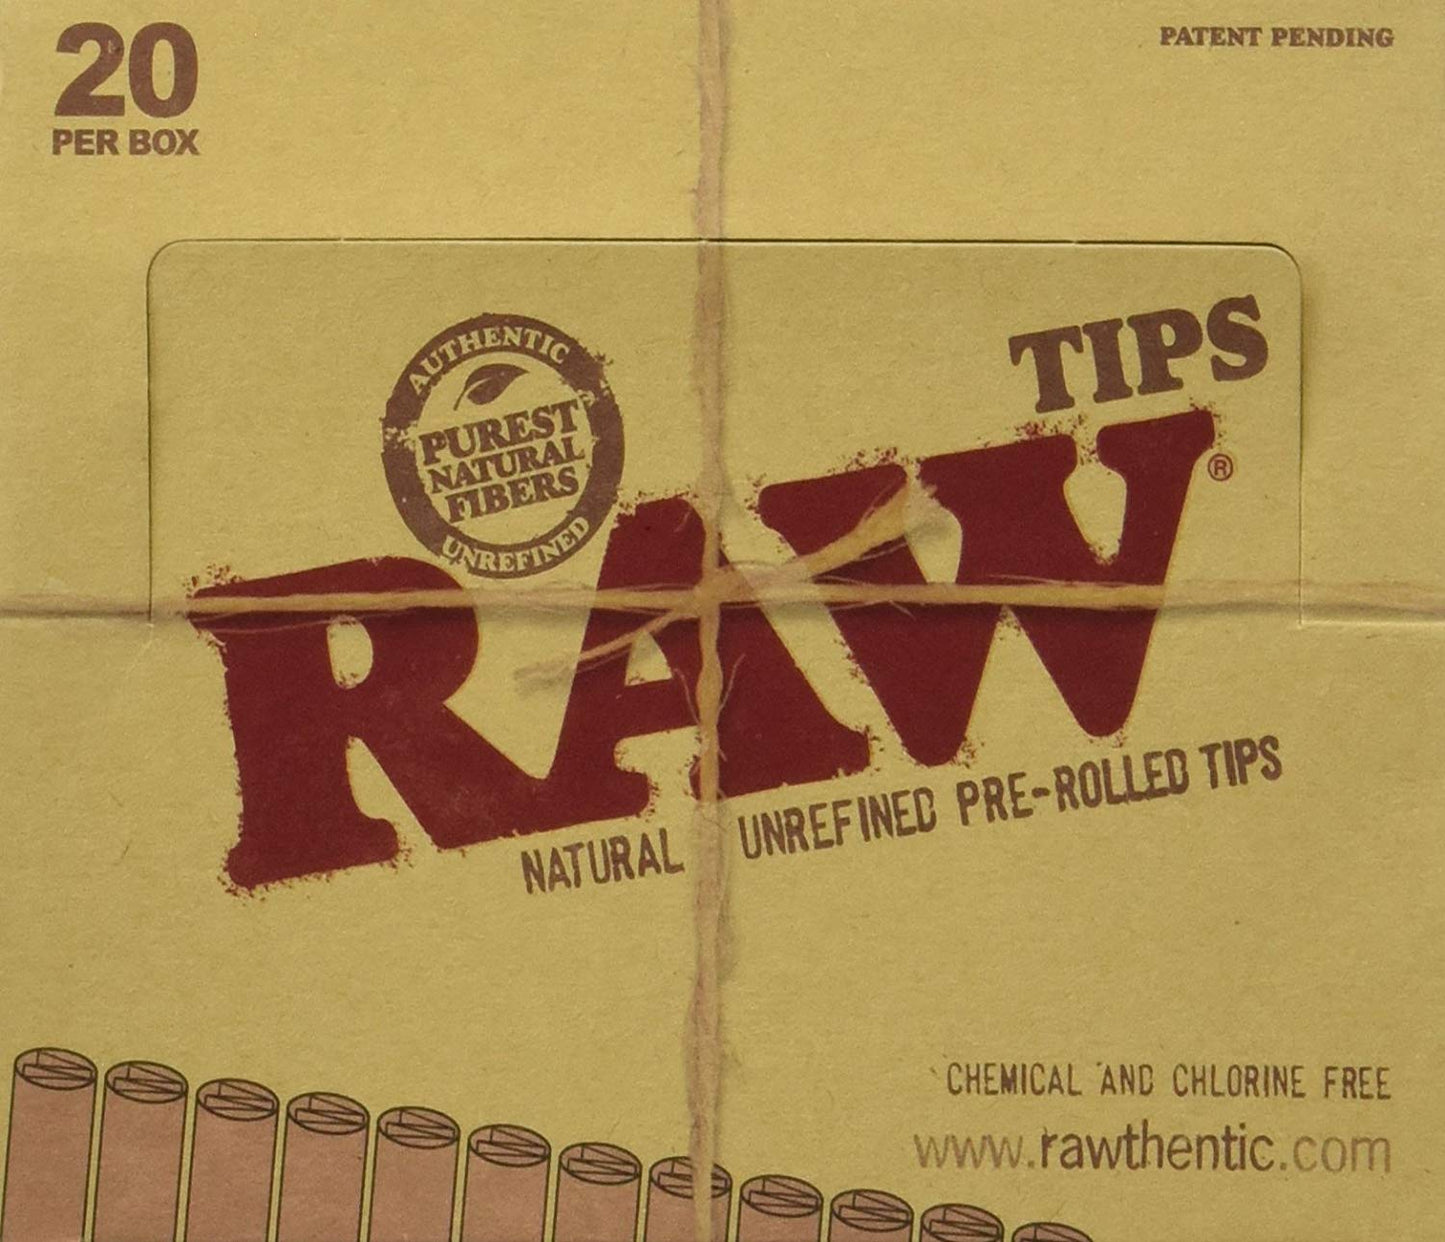 Raw Natural Unrefined Pre-Rolled TIps 20CT